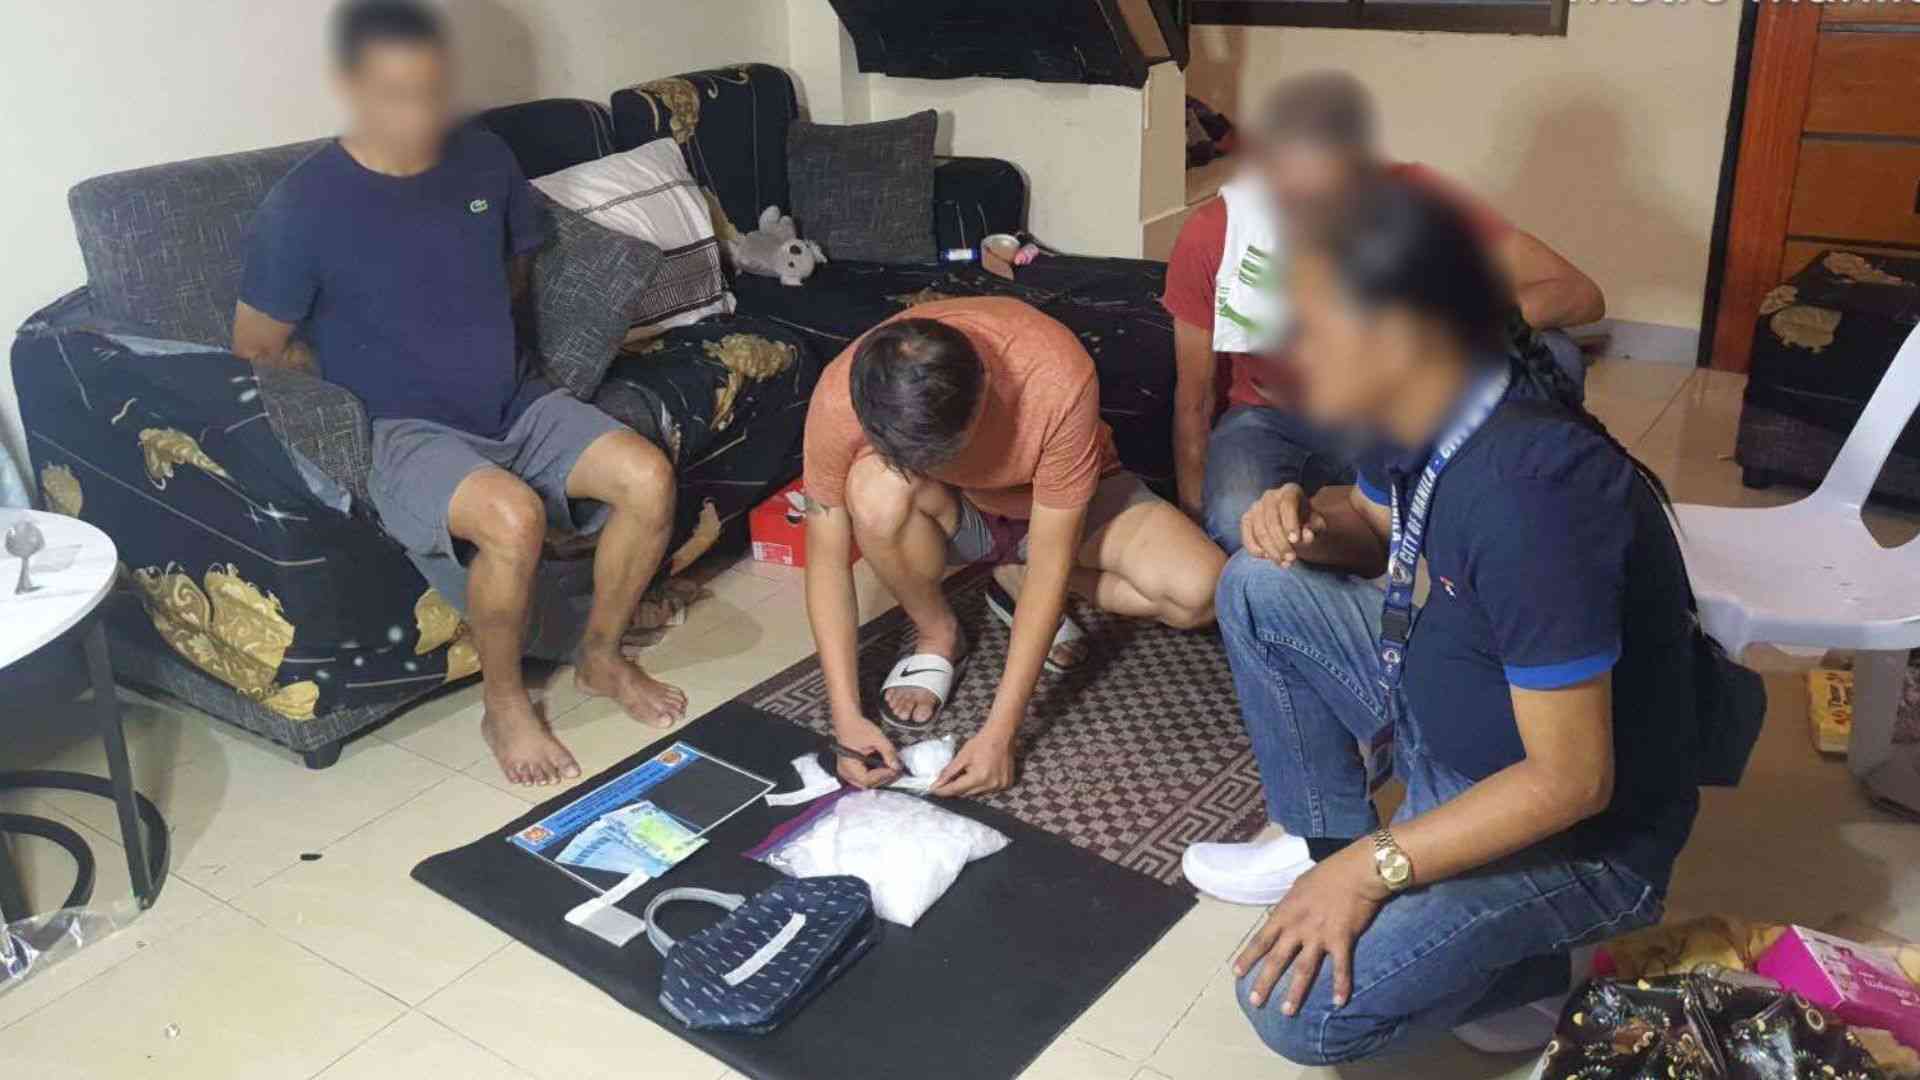 Buy-bust operation in Manila results in arrest of man, seizure of 1,125 grams of drugs